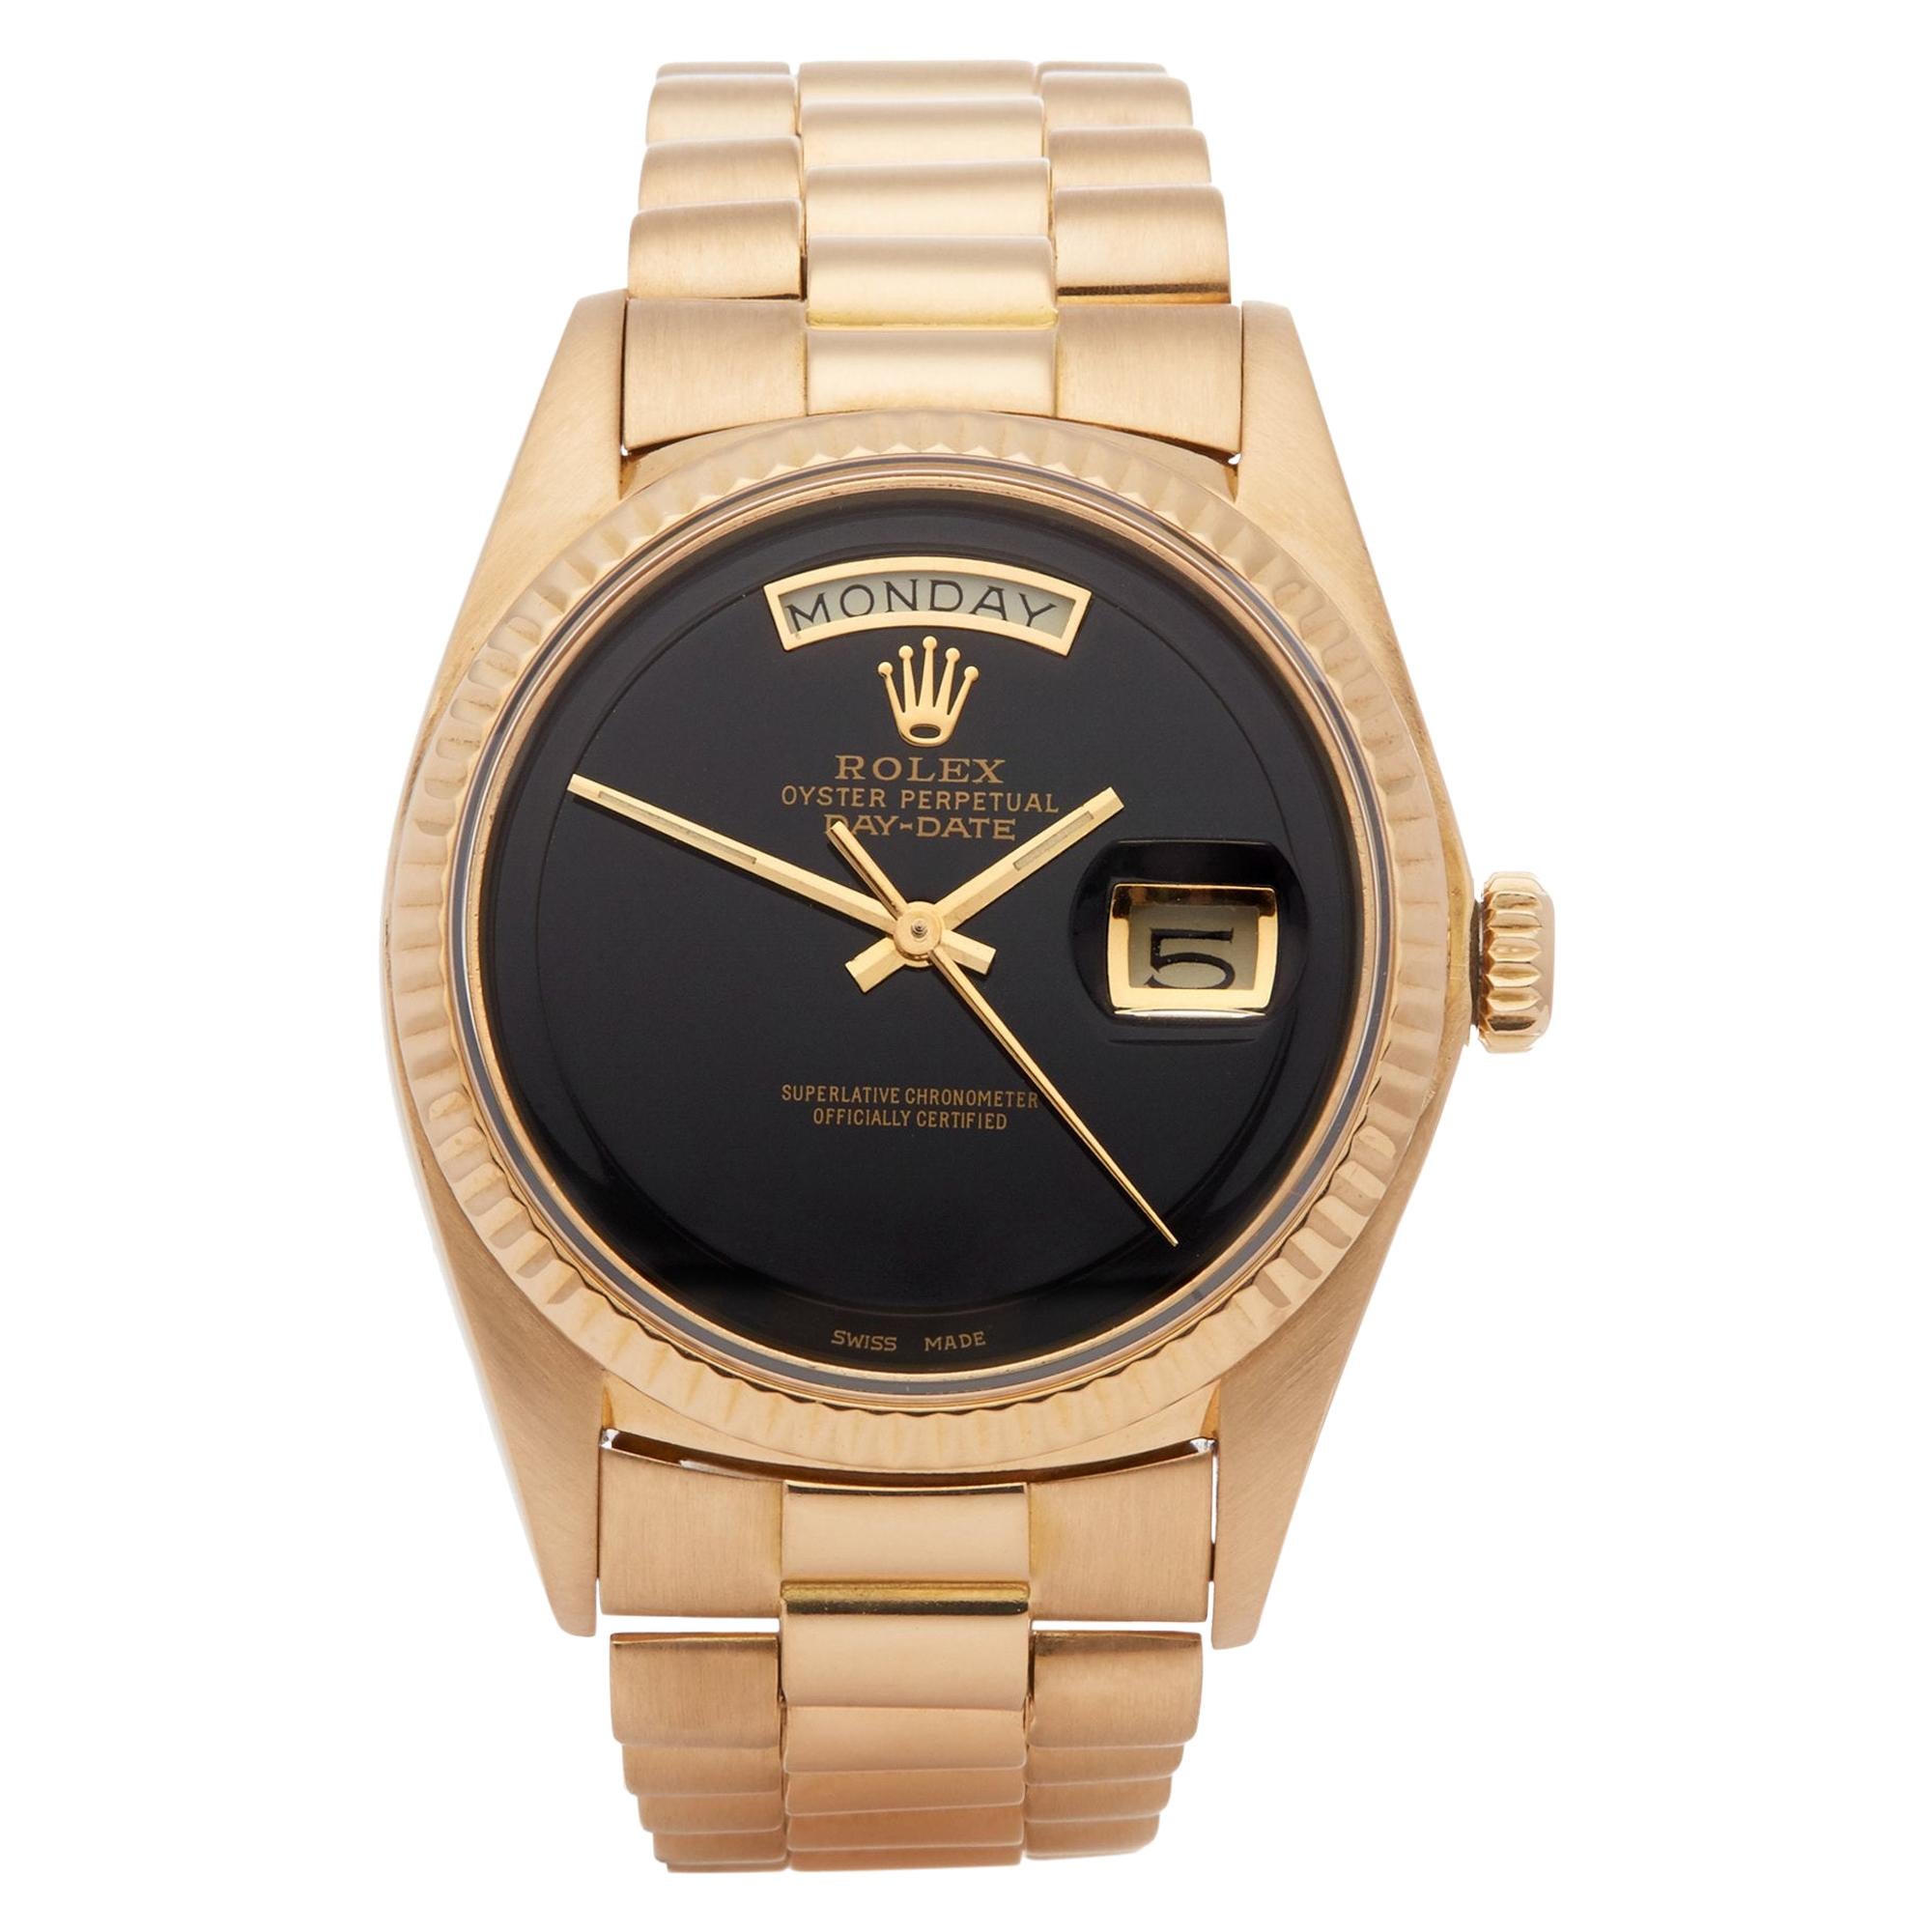 Rolex Day-Date 36 1803 Unisex Yellow Gold Onyx Step Dial Watch